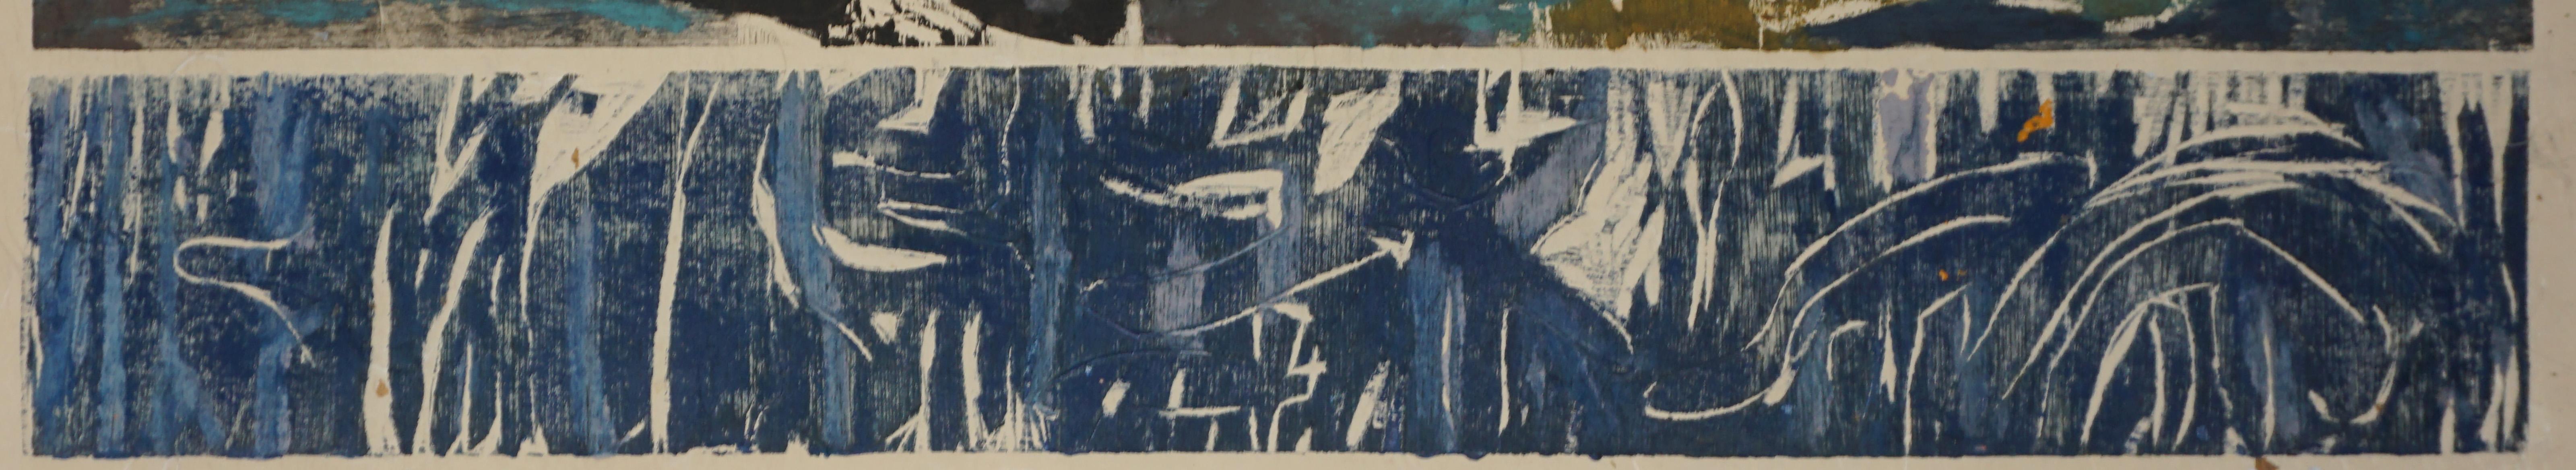 Vintage Original Abstracted Landscape Silk Screen on Rice Paper

Dramatic non-objective and abstracted landscape silkscreen in black india ink and neutral Casein paint tones. Unsigned, circa 1970. A band of grassy foliage in deep blue water provides